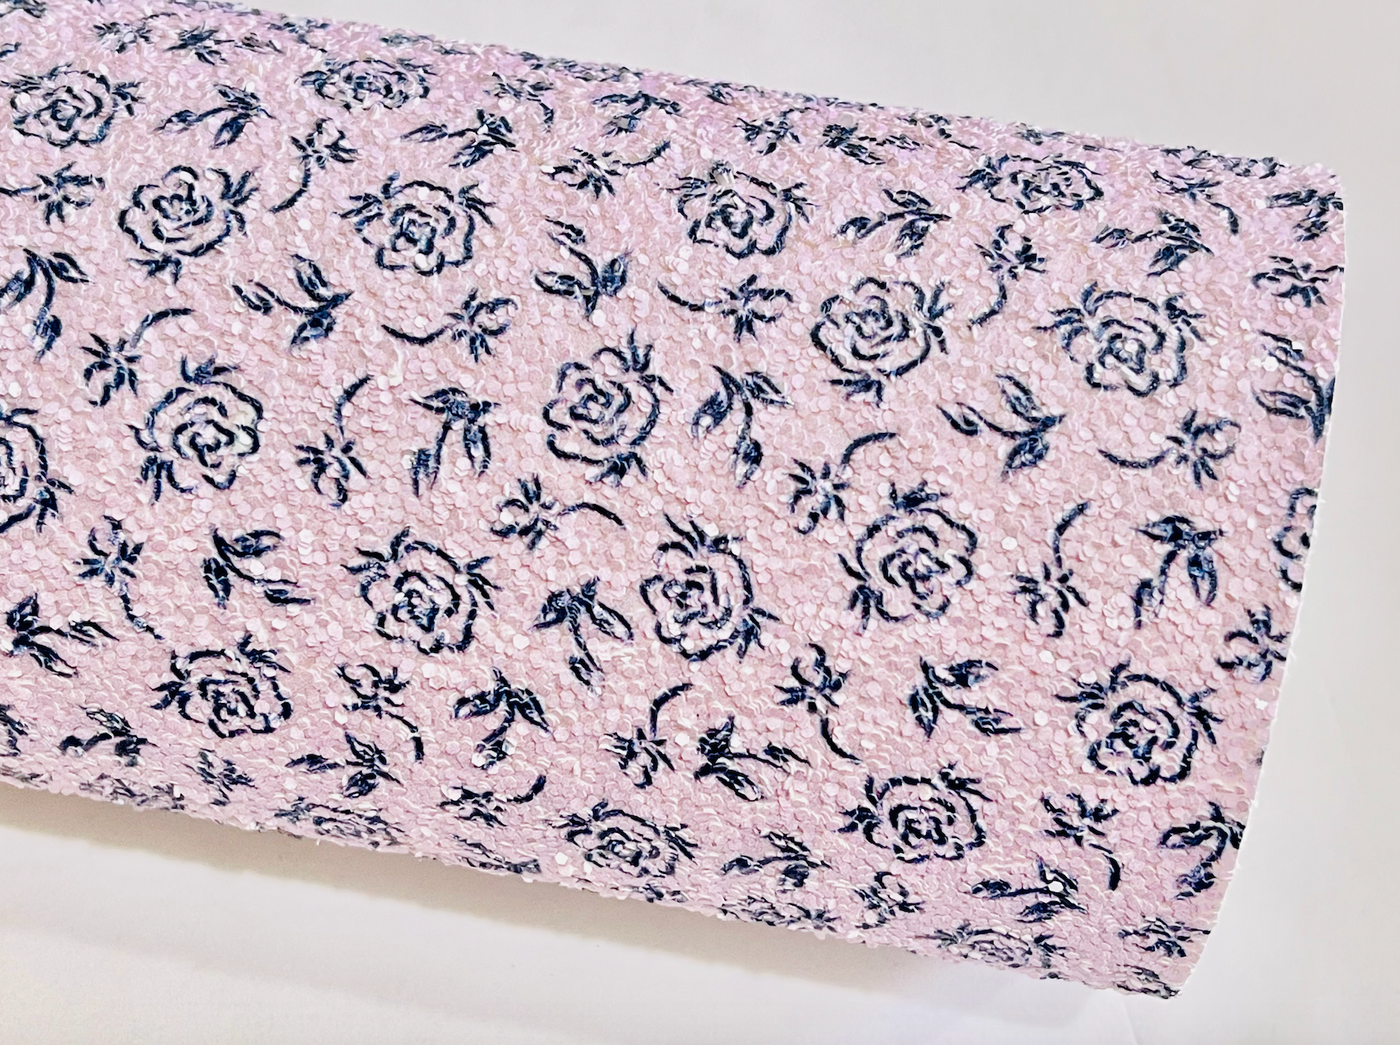 Lilac Rose Chunky Glitter Fabric - Matte Lilac Pink with Navy Rose Print